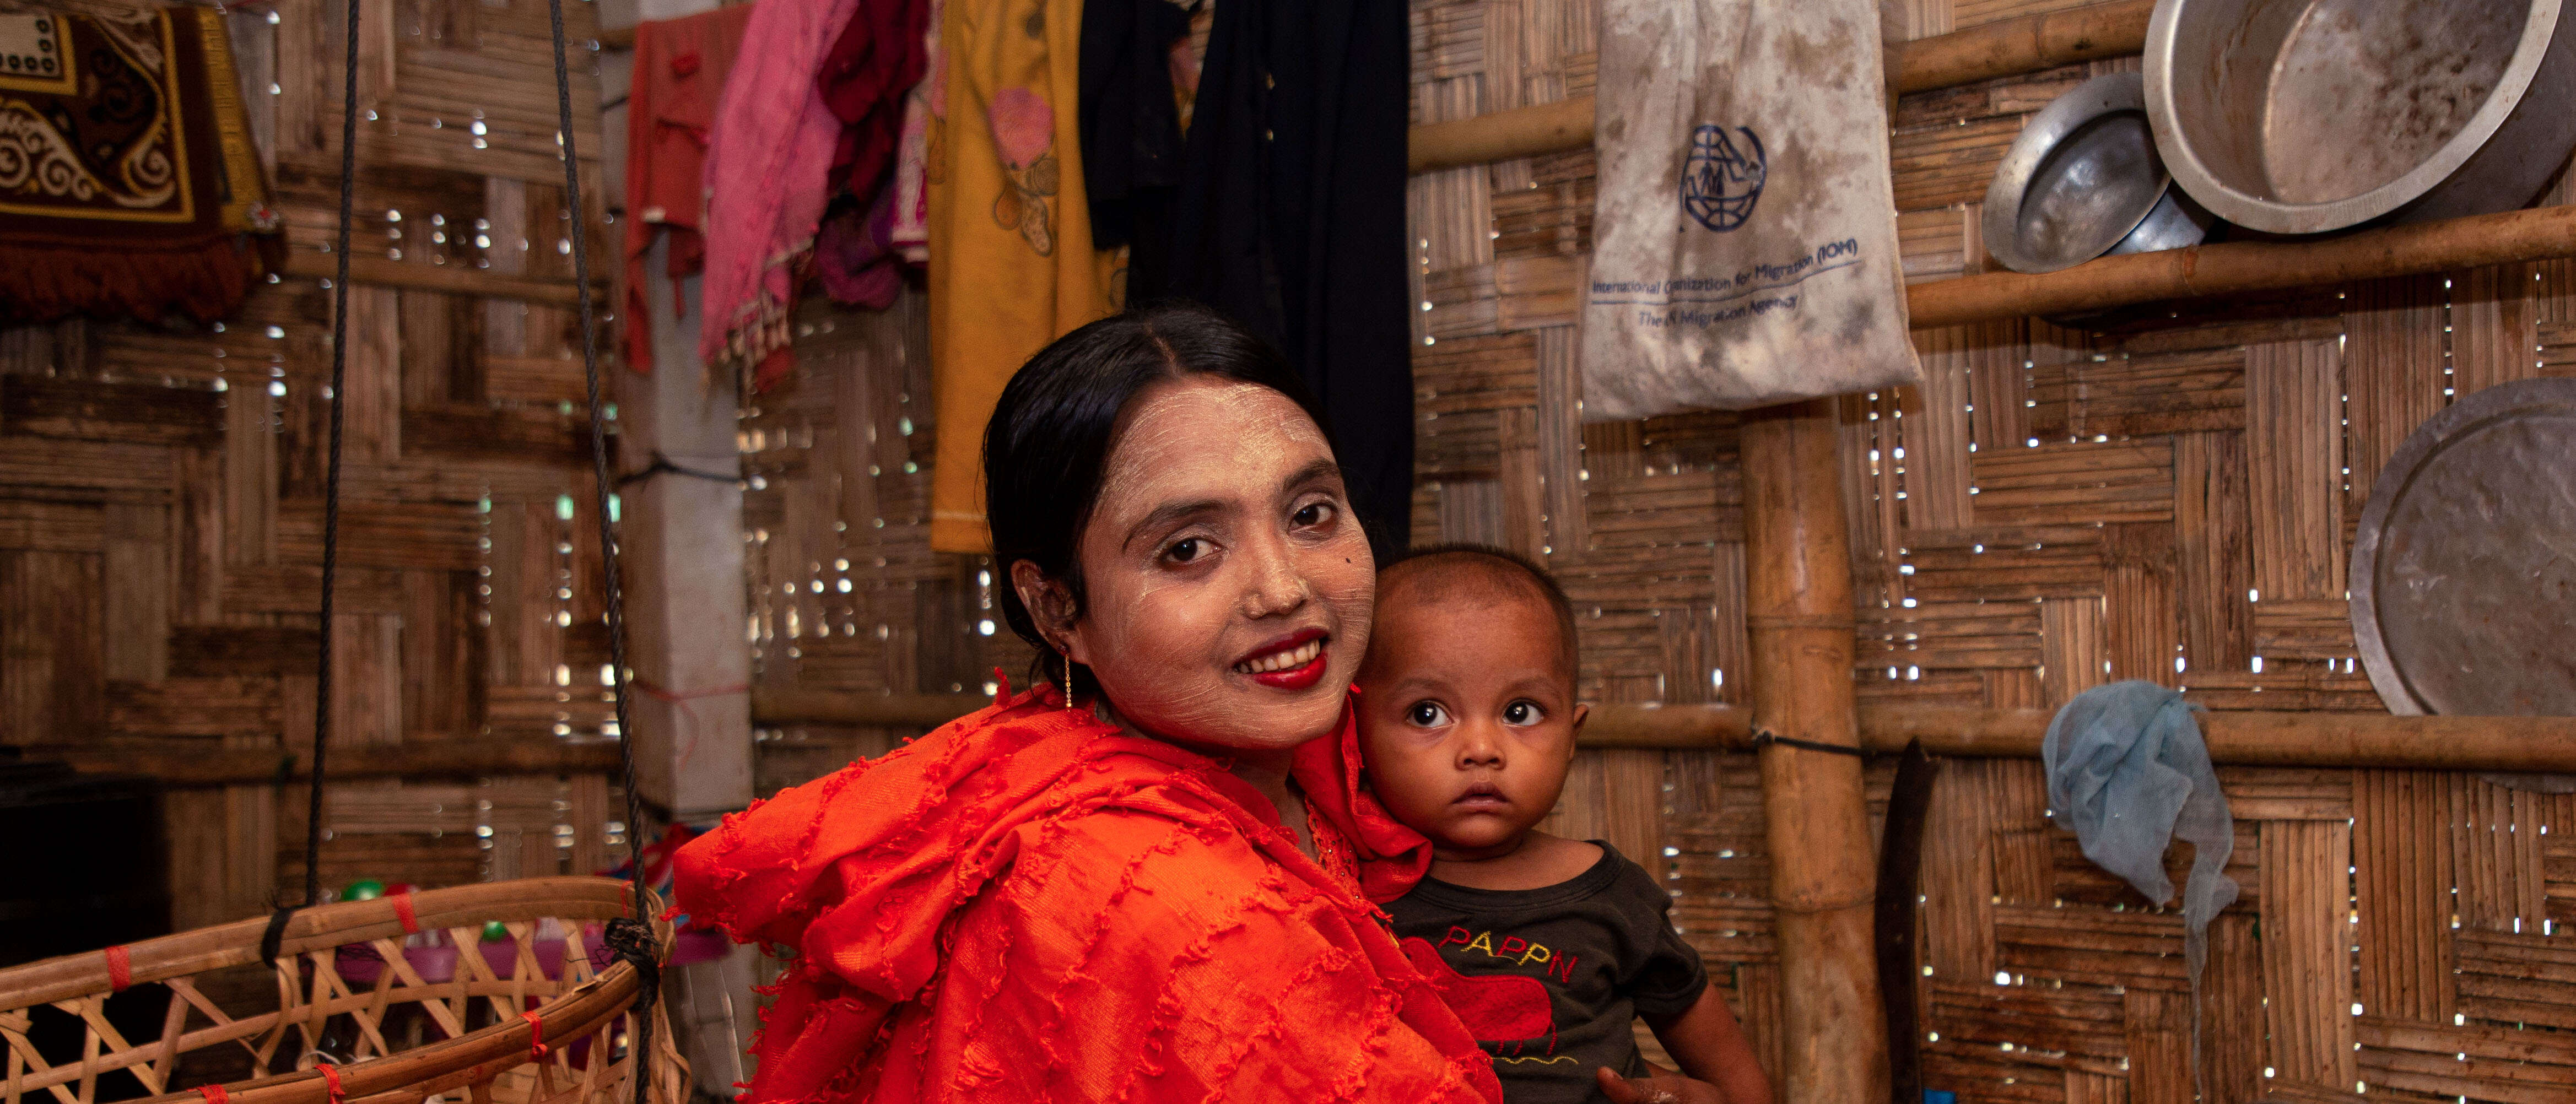 A woman in Bangladesh smiles while holding a child close to her.